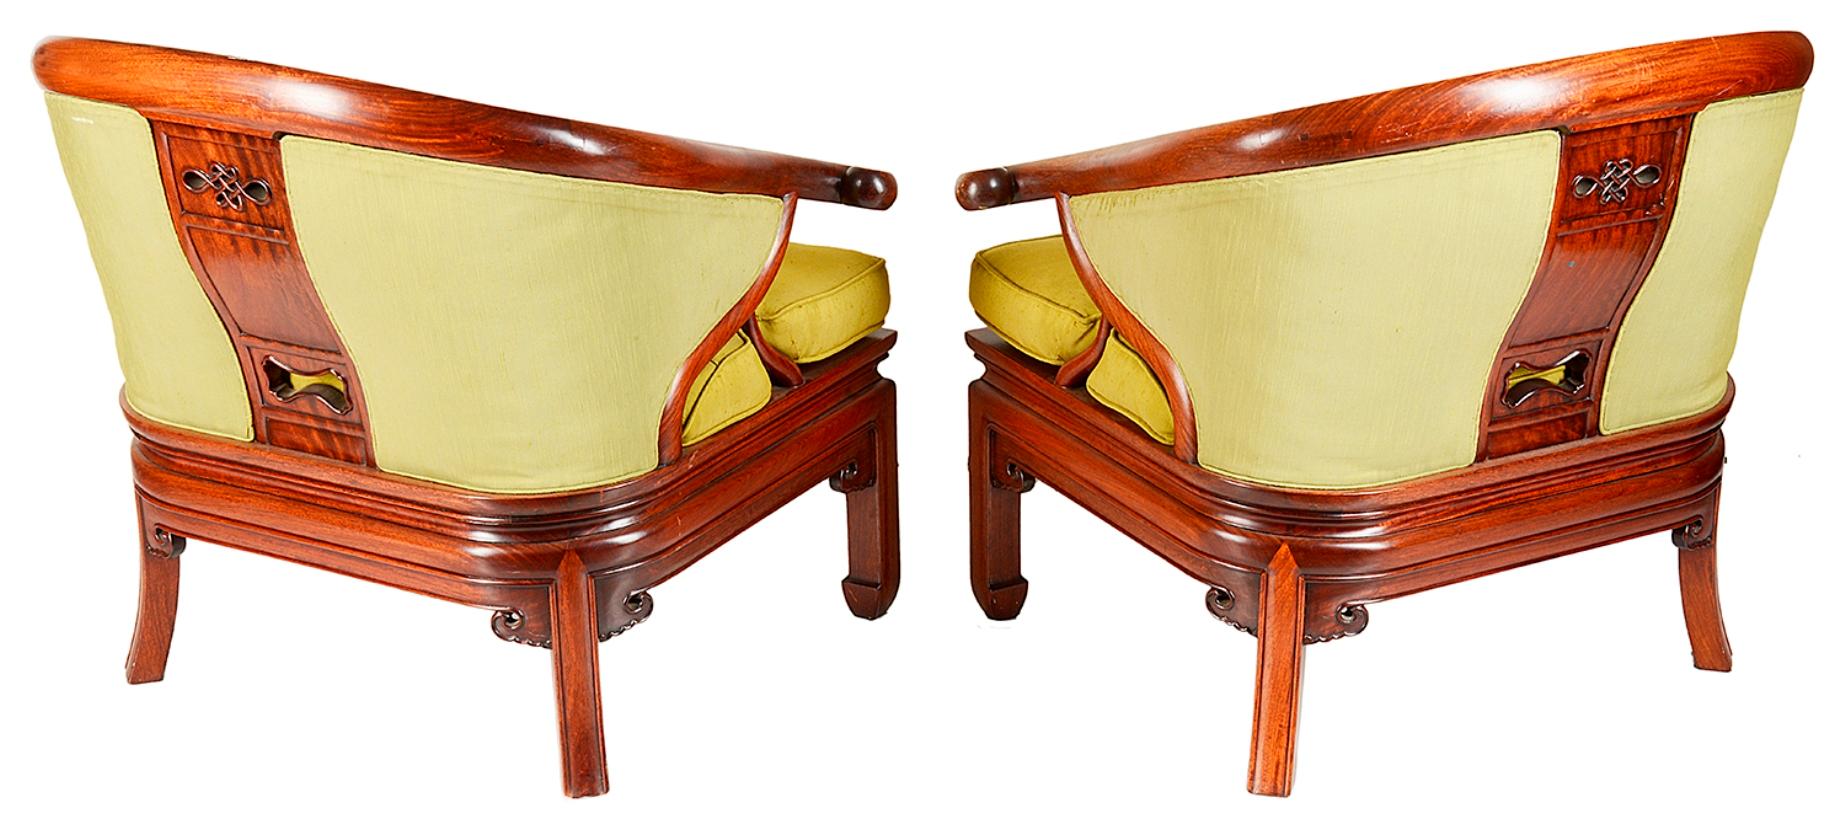 A late 19th-early 20th century pair of Chinese hardwood horse shoe style armchairs, each with carved decoration to the splats, green upholstered back and seats and raised on square section legs.